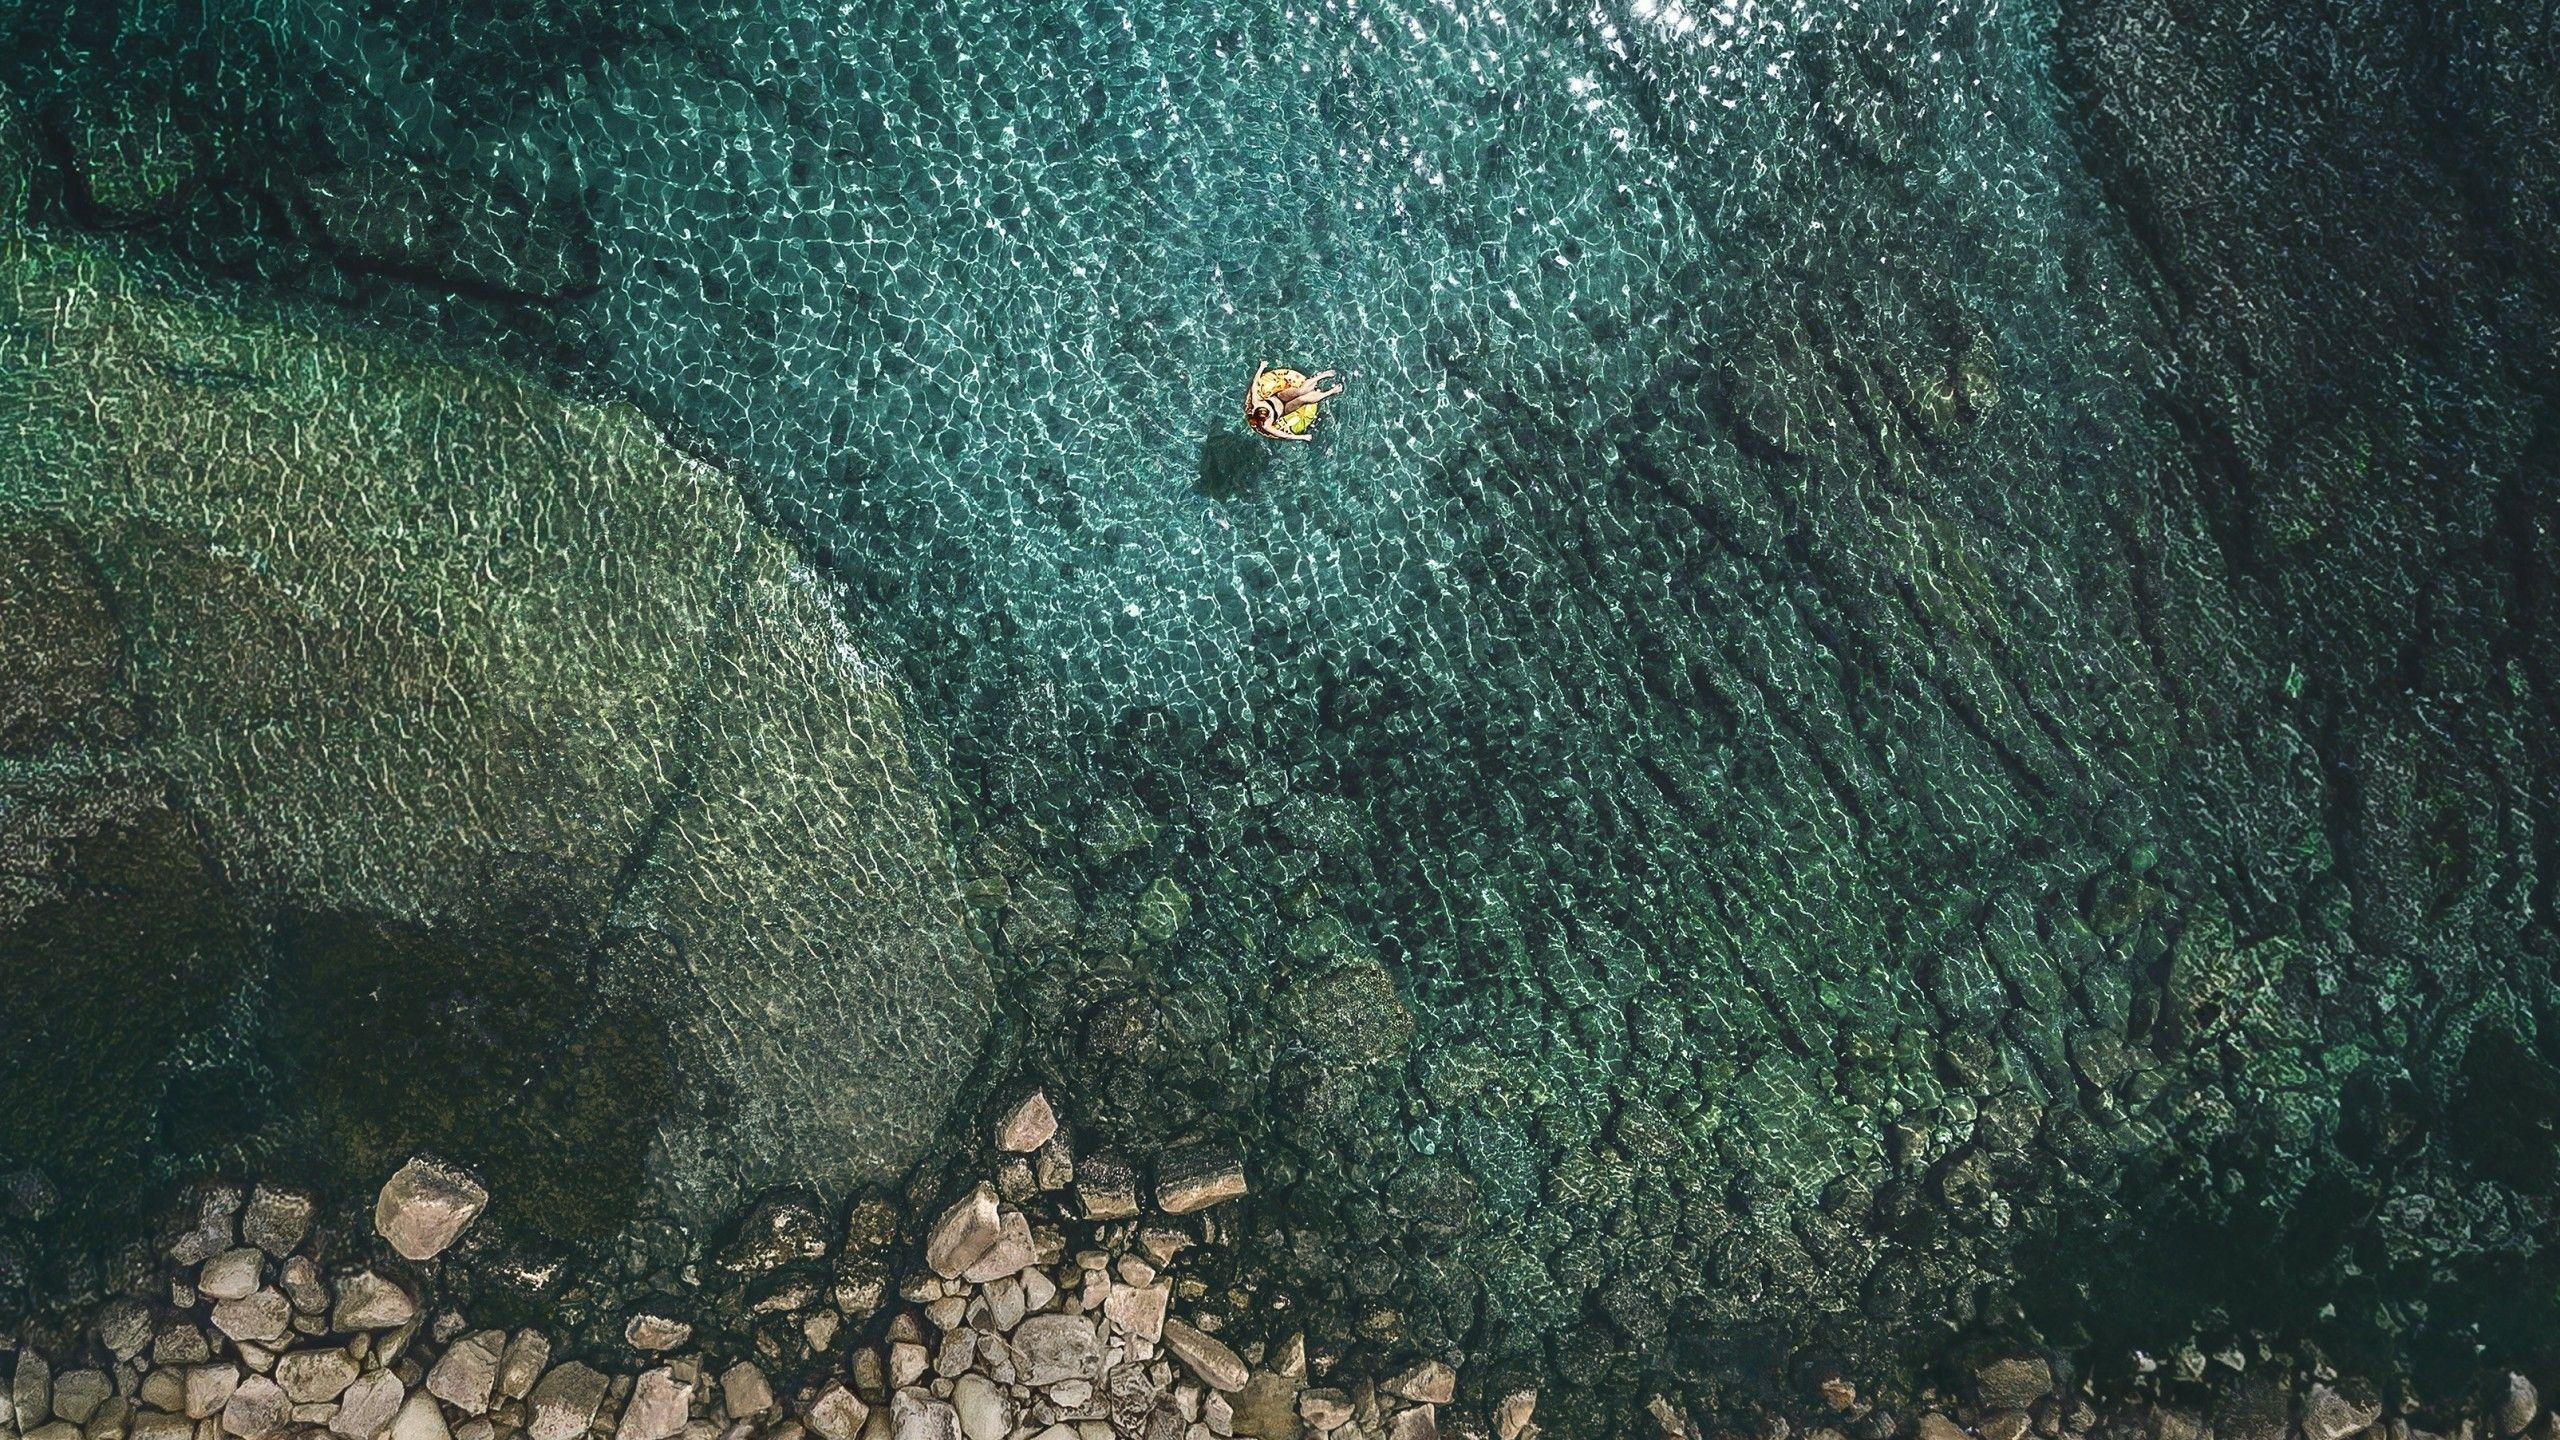 iphone wallpaper hd for pc